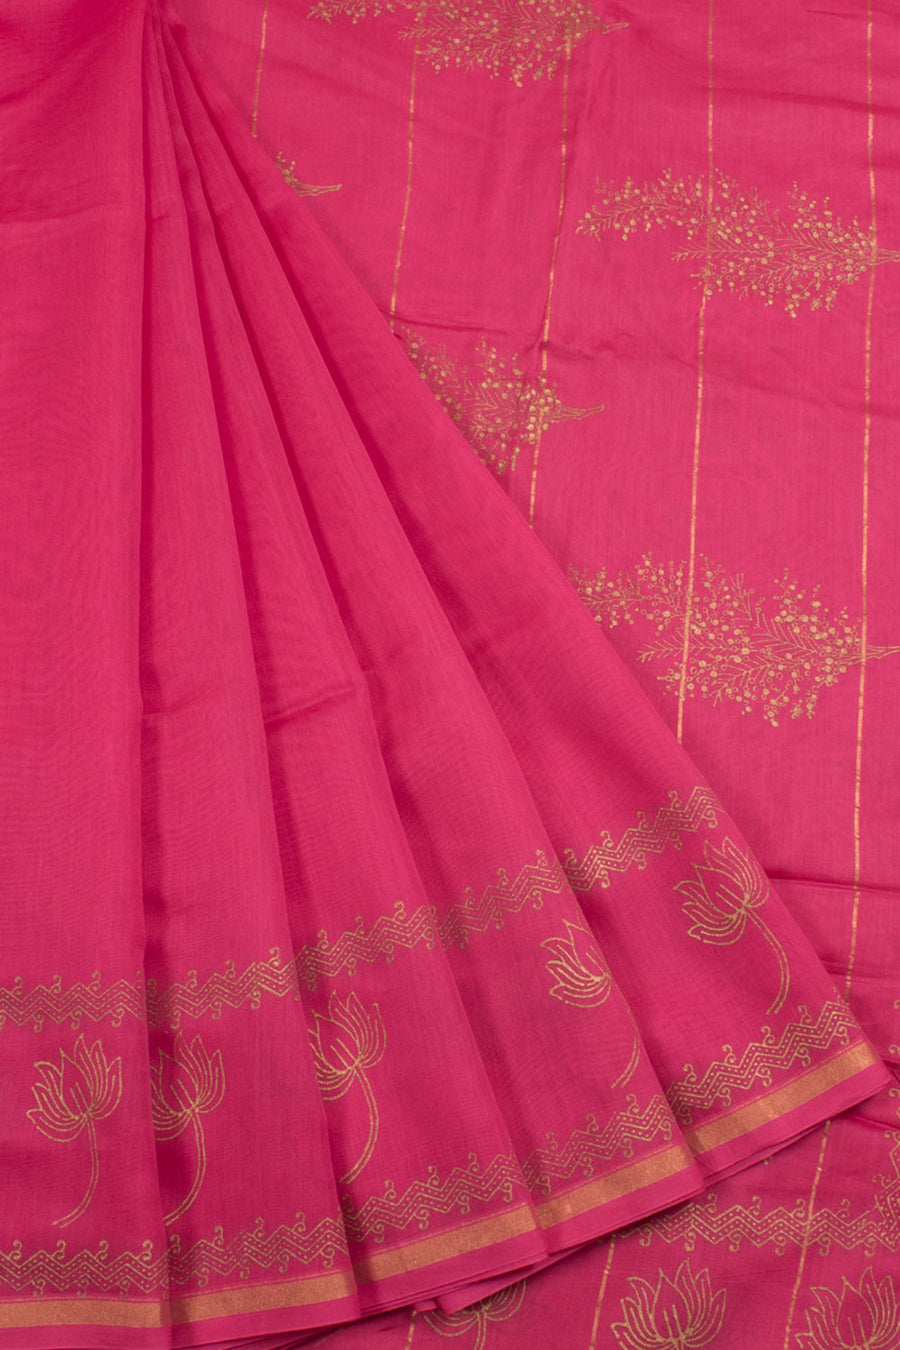 Hand Block Printed Chanderi Silk Cotton Saree with Floral Motifs and Fancy Tassels